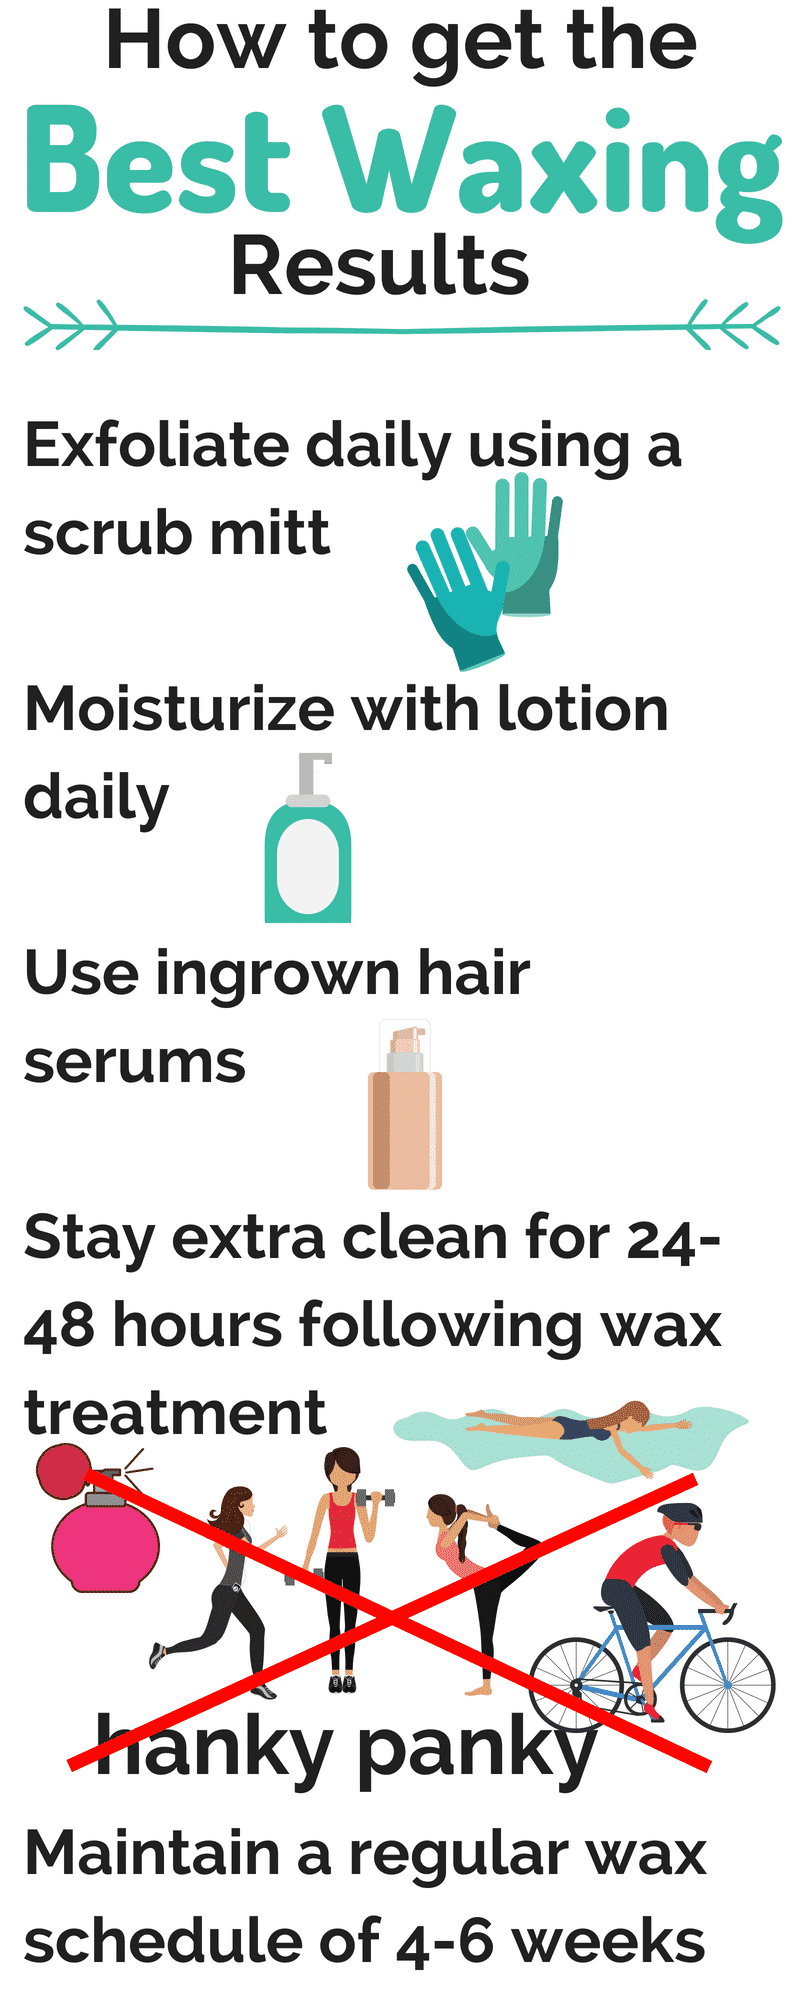 HOW TO GET THE BEST WAXING RESULTS-WAXING INFOGRAPHIC- A professional waxer can give you the best advice when it comes to getting the best possible results with waxing